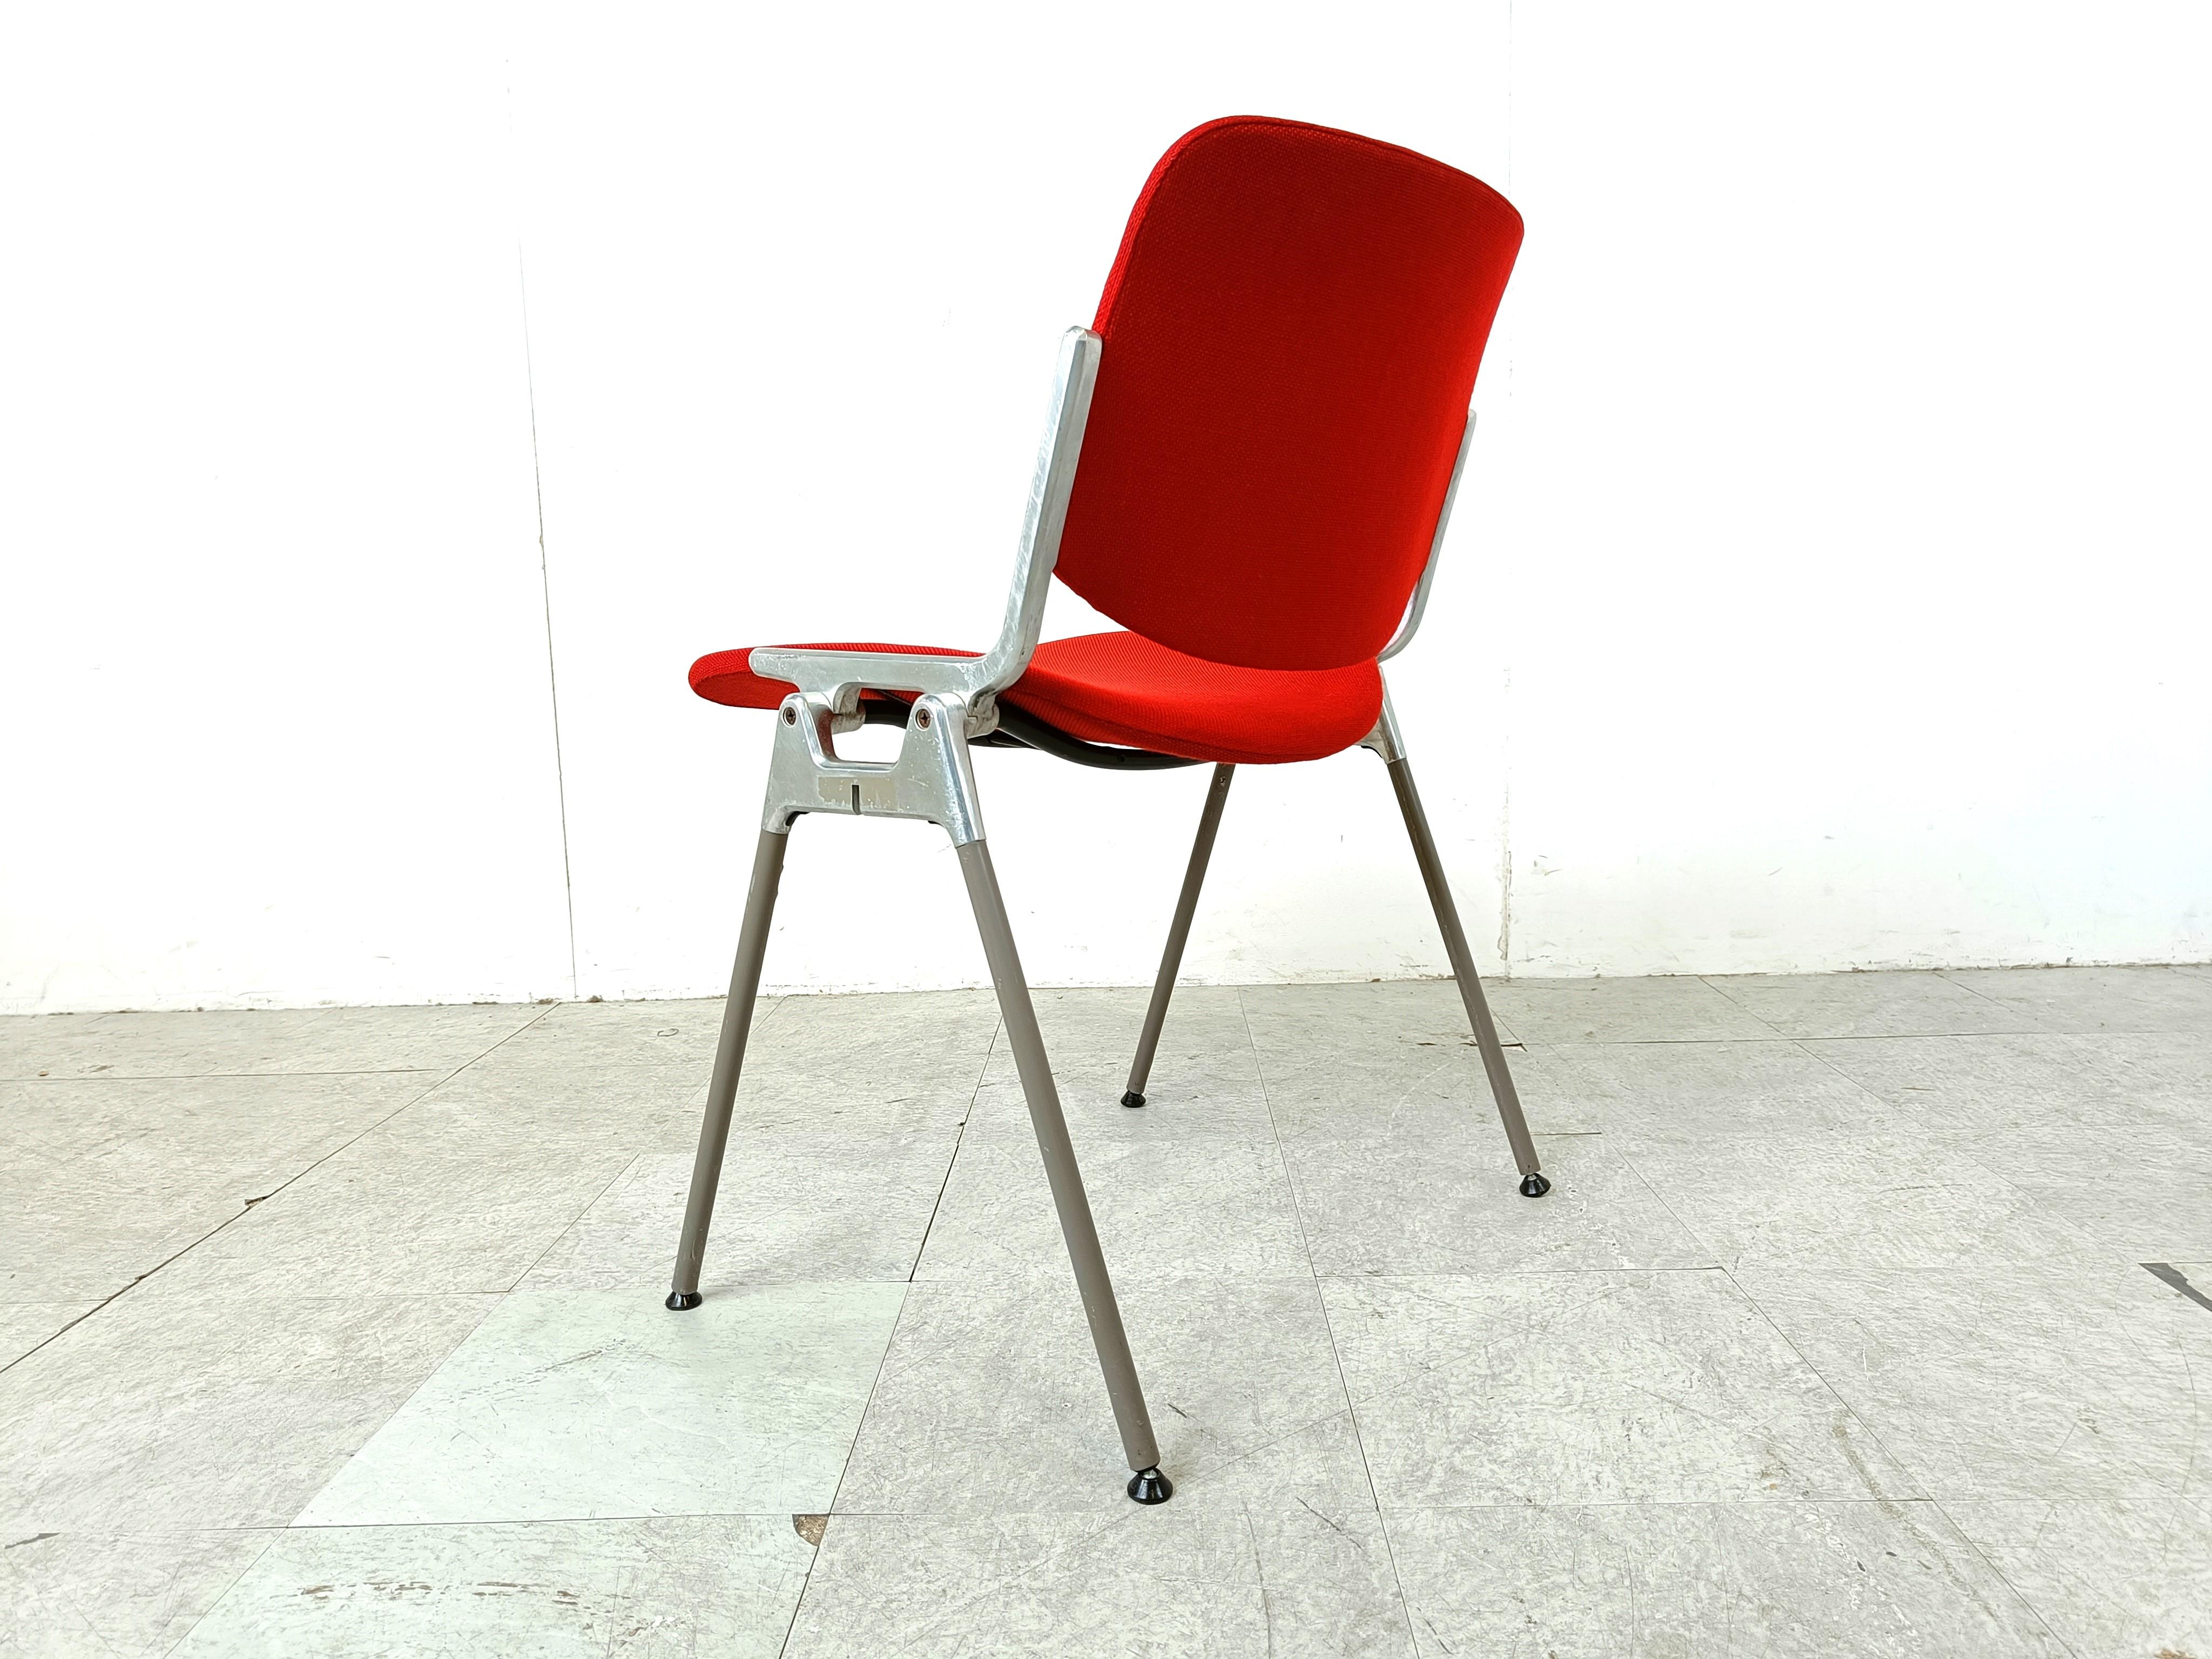 Vintage dining chairs or side chairs designed by Giancarlo Piretti for Castelli.

These chairs can be stacked and save up a lot of space for occasional use.

reupholstered in red fabric.

Good original condition with normal age related wear

1970s -